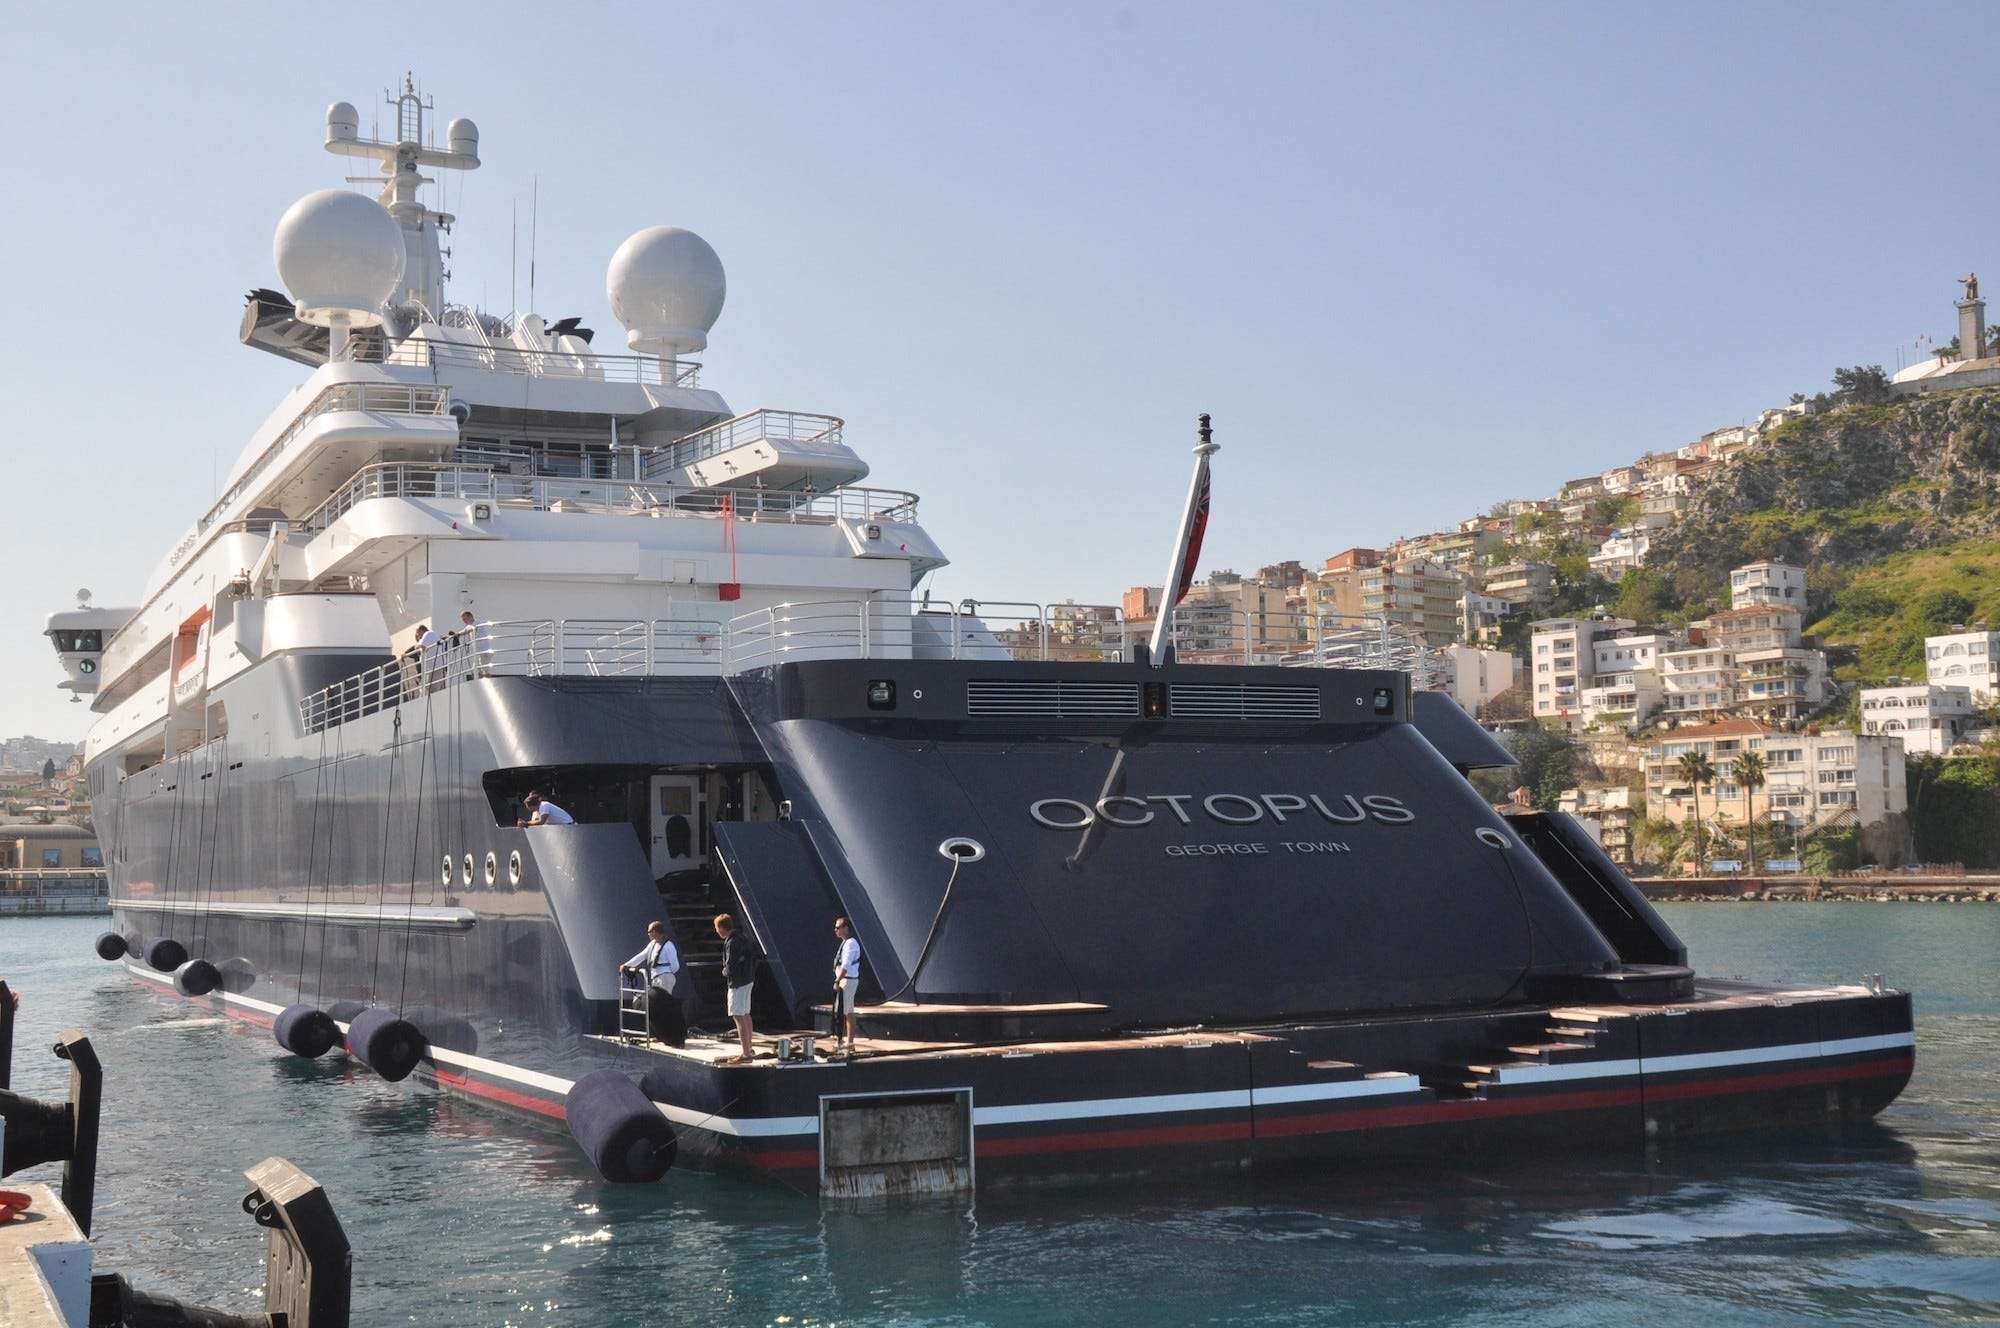 how much is paul allen's yacht worth